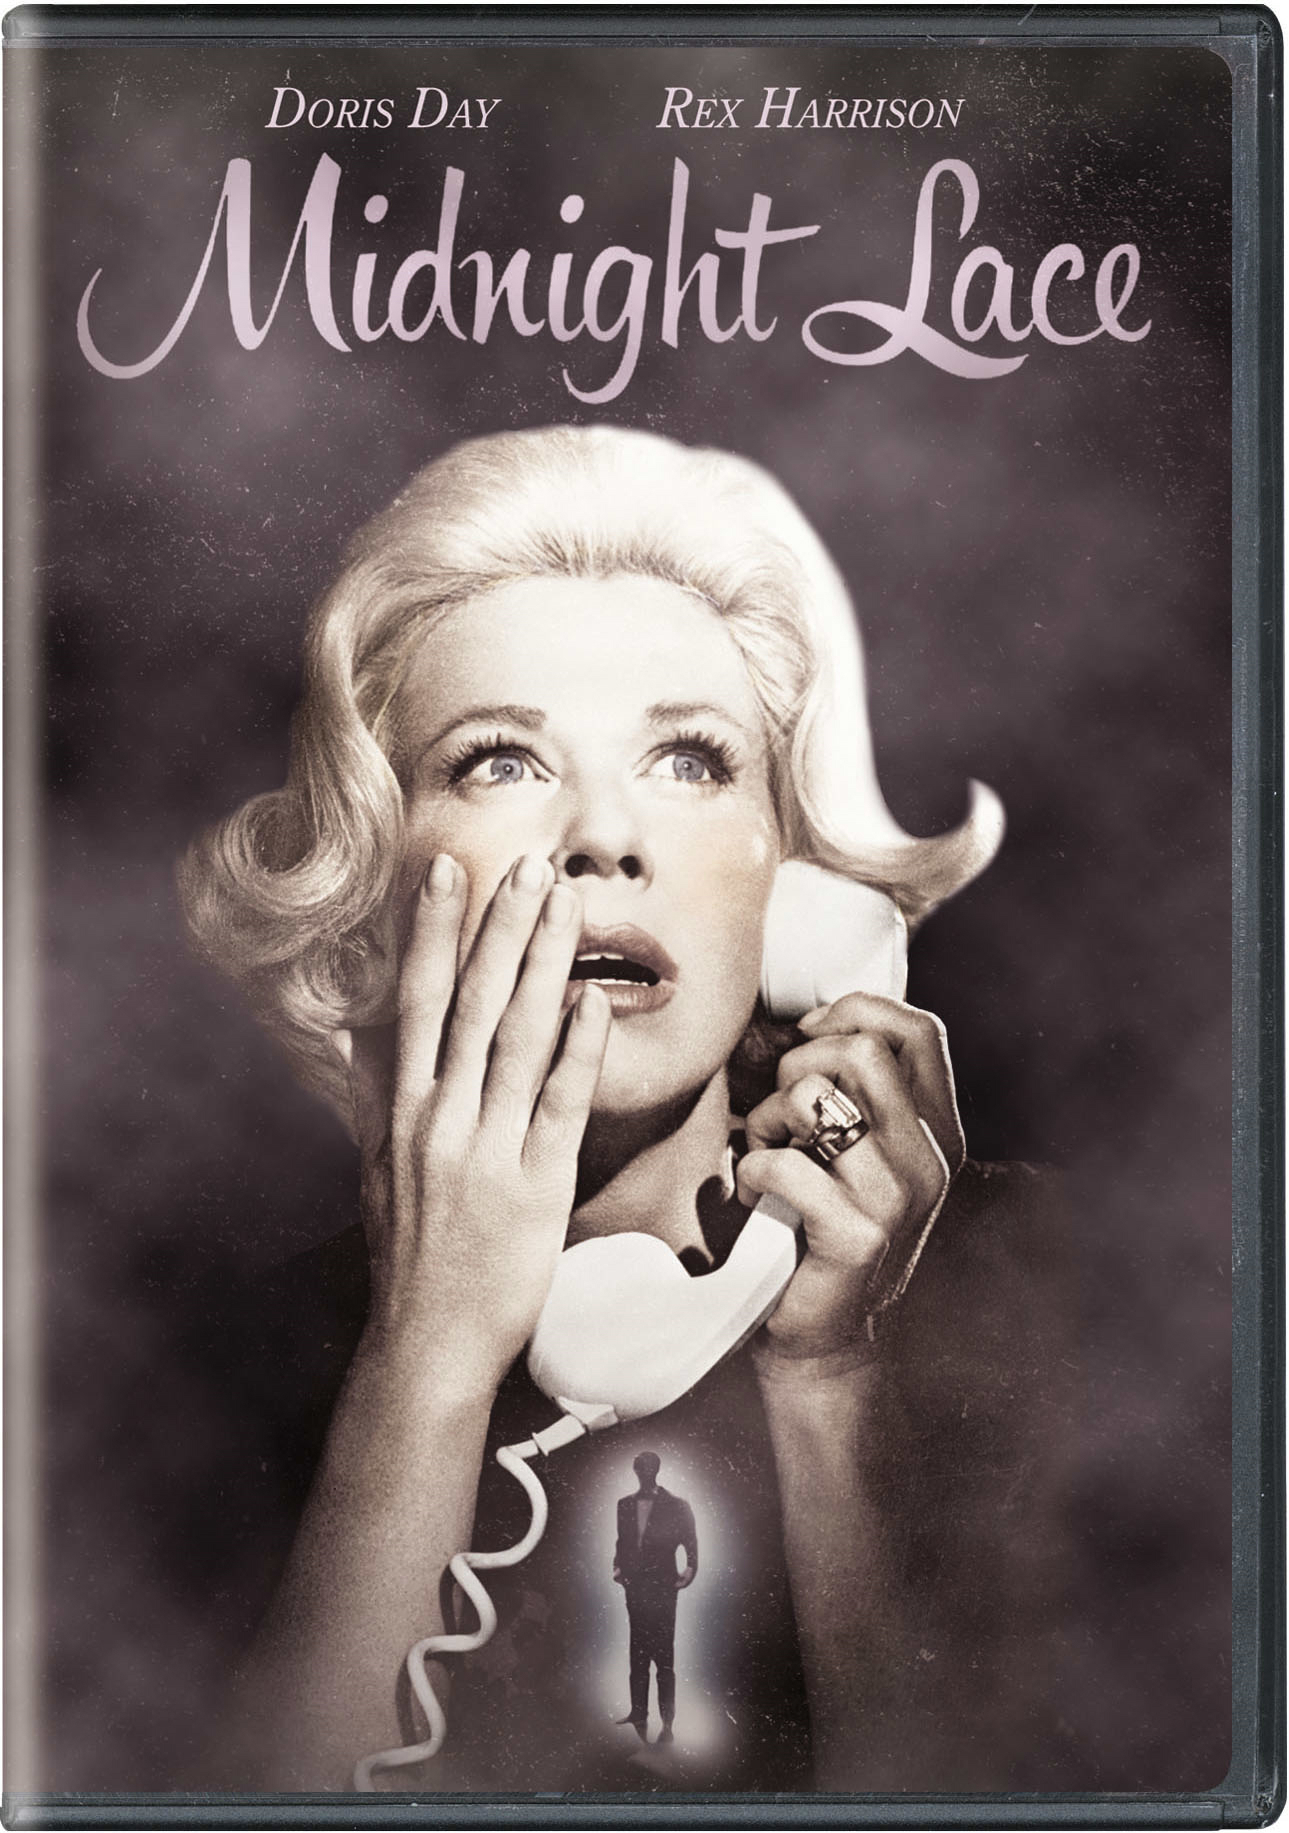 Midnight Lace - DVD [ 1960 ]  - Modern Classic Movies On DVD - Movies On GRUV